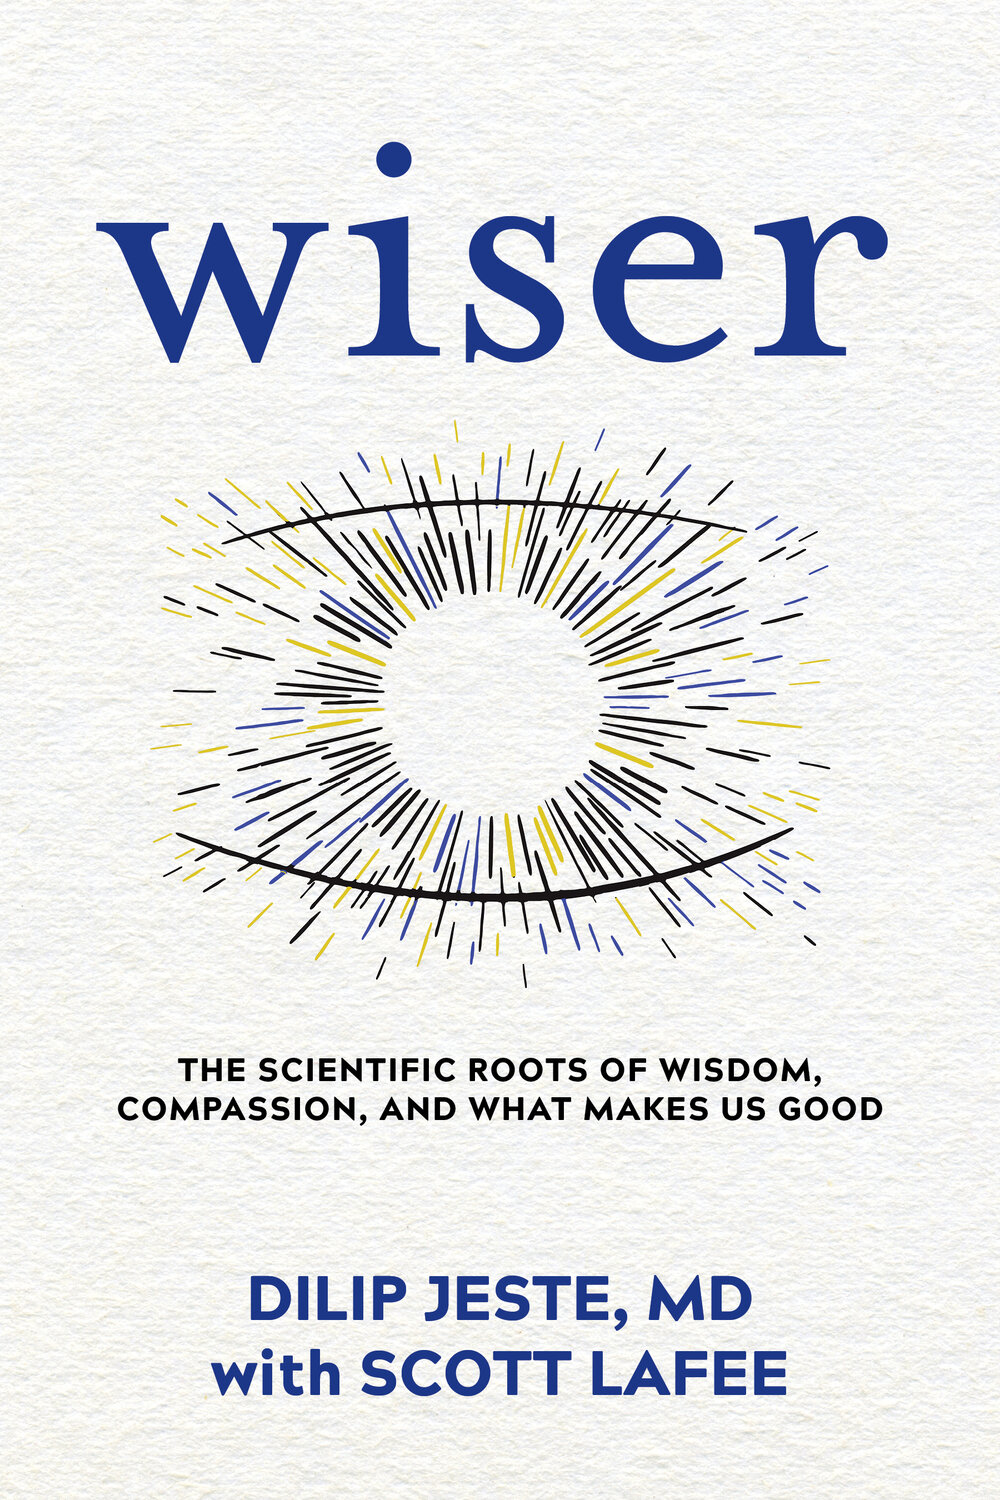 Wiser: The Scientific Roots of Wisdom, Compassion, and What Makes Us Feel Good by Dilip Jeste, MD